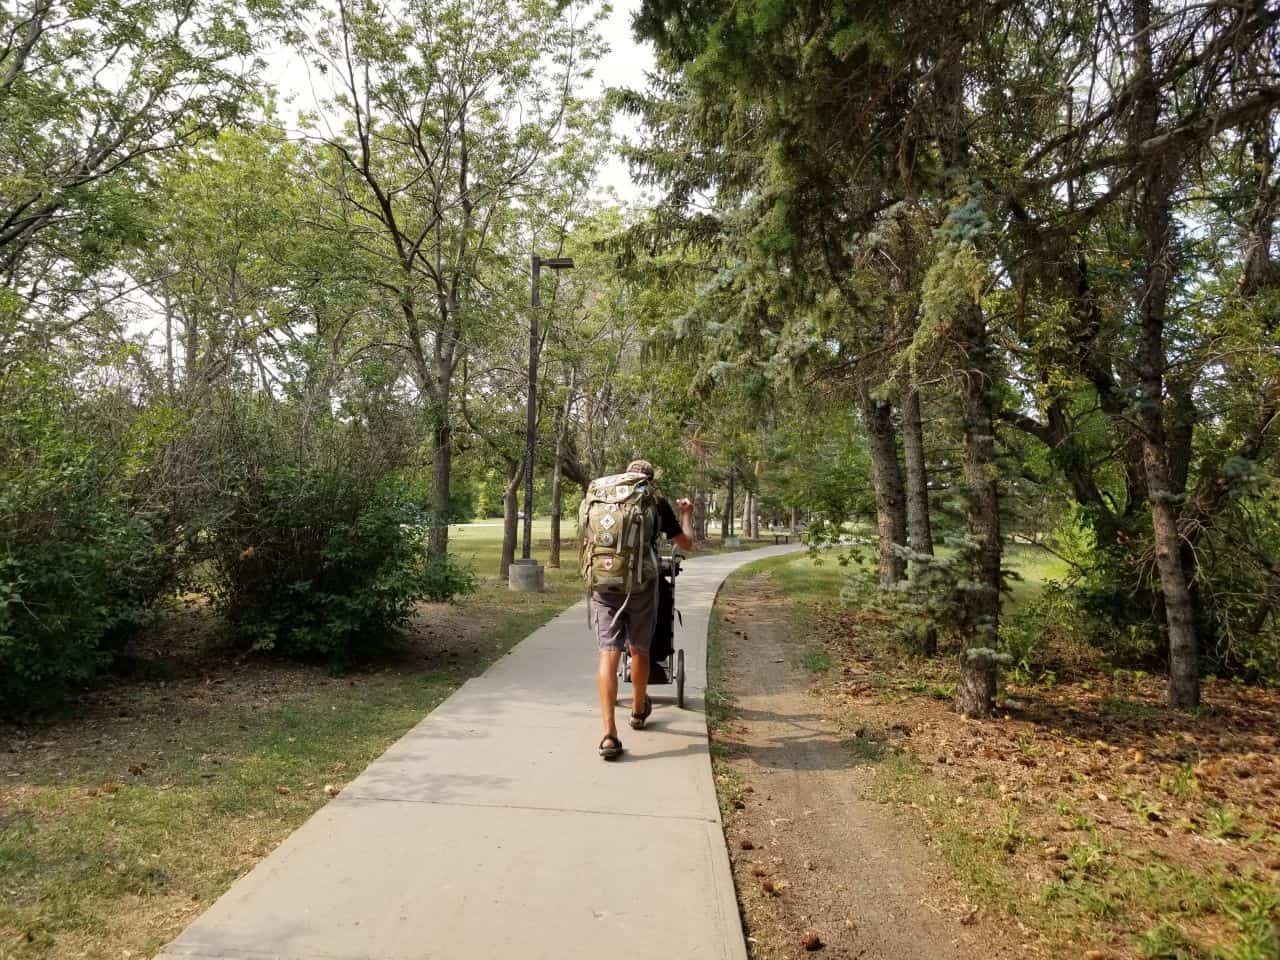 The Wascana Center Trail is an urban pathway that is part of the Trans Canada Trail, and it is popular with walkers, joggers, and cyclists in Regina, Saskatchewan.